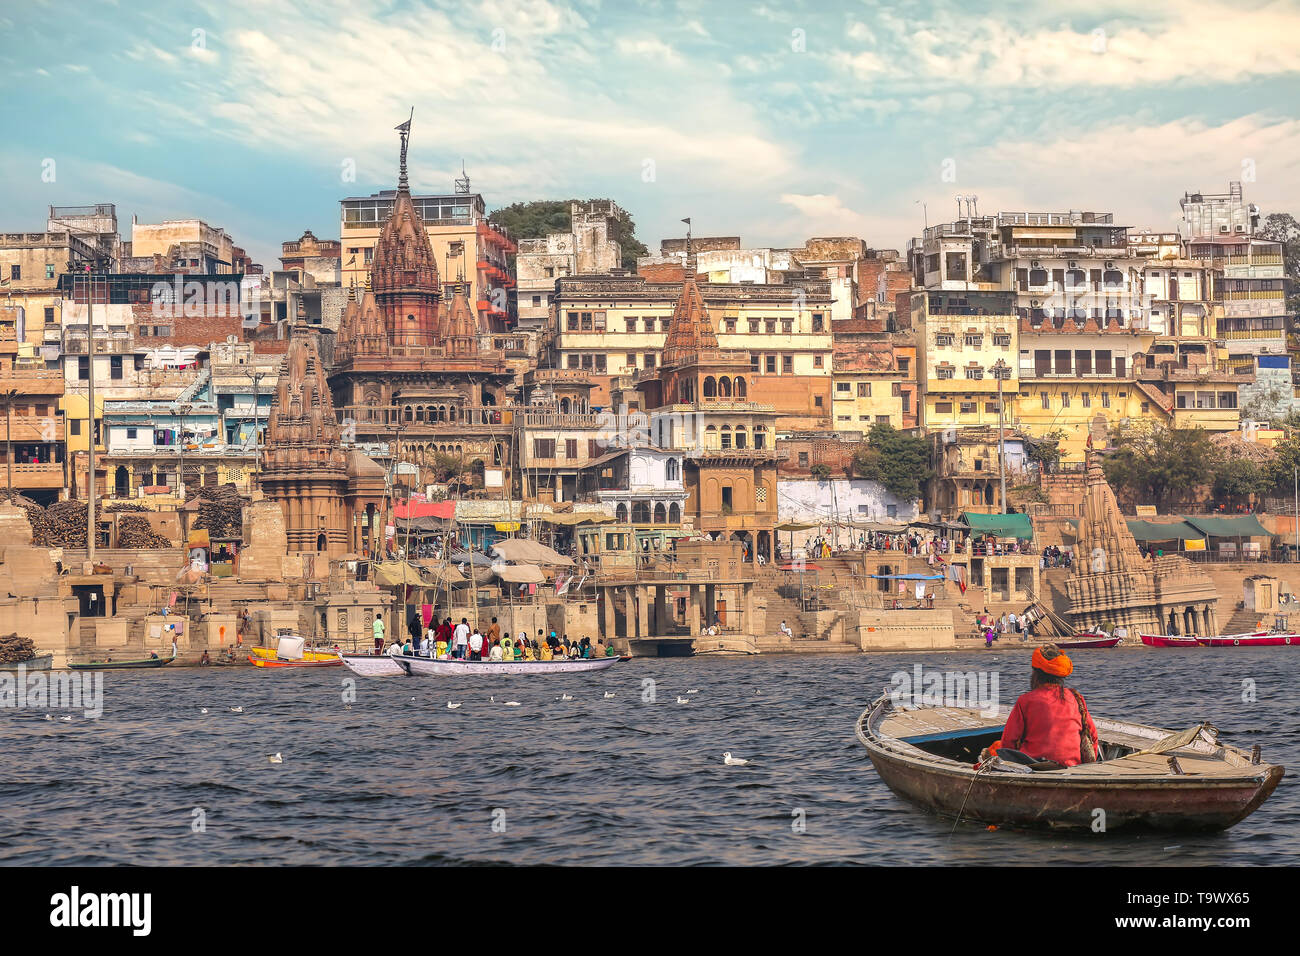 Aged man sitting on a wooden boat on river Ganges overlooking the historic Varanasi India city architecture at sunset Stock Photo